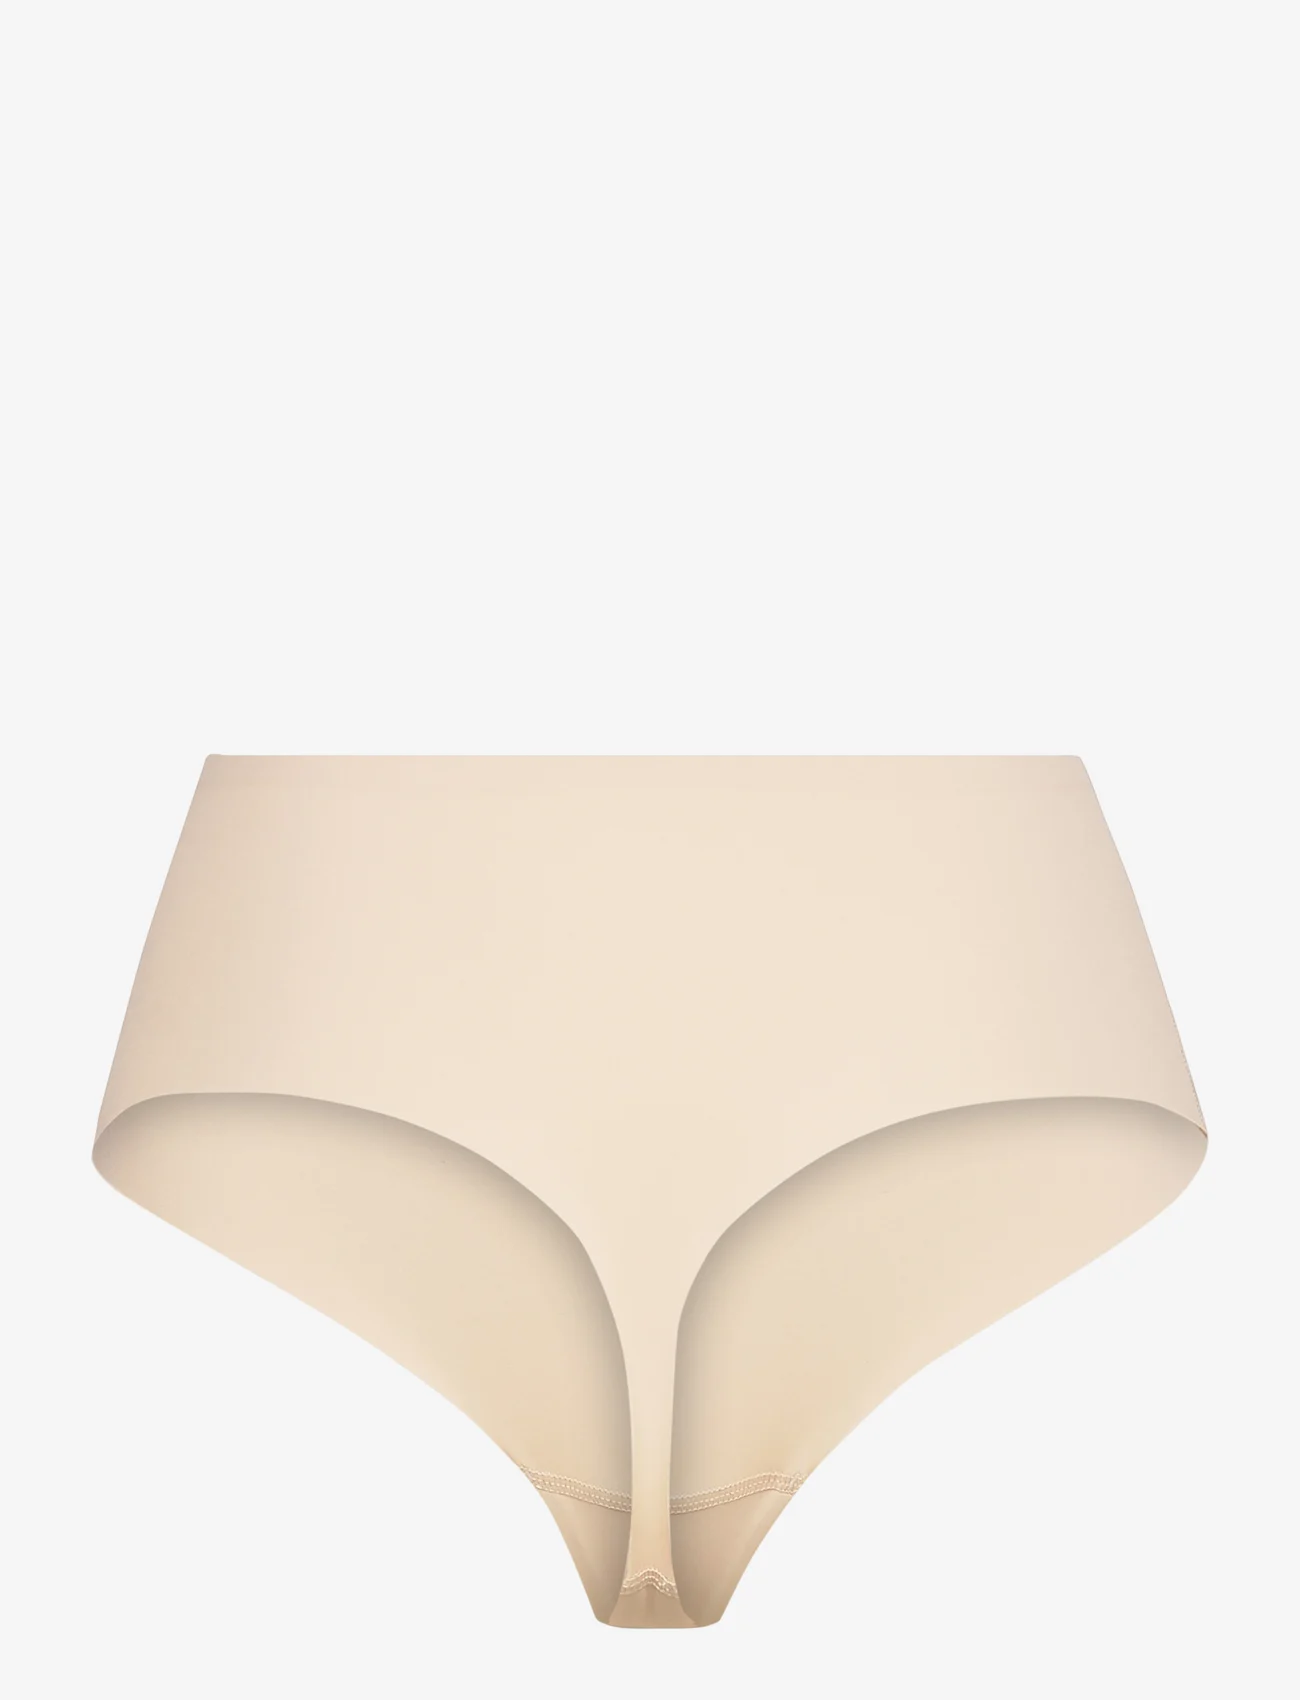 Esprit Bodywear Women - Made of recycled material: shaping-effect thong - majtki bezszwowe - dusty nude - 1